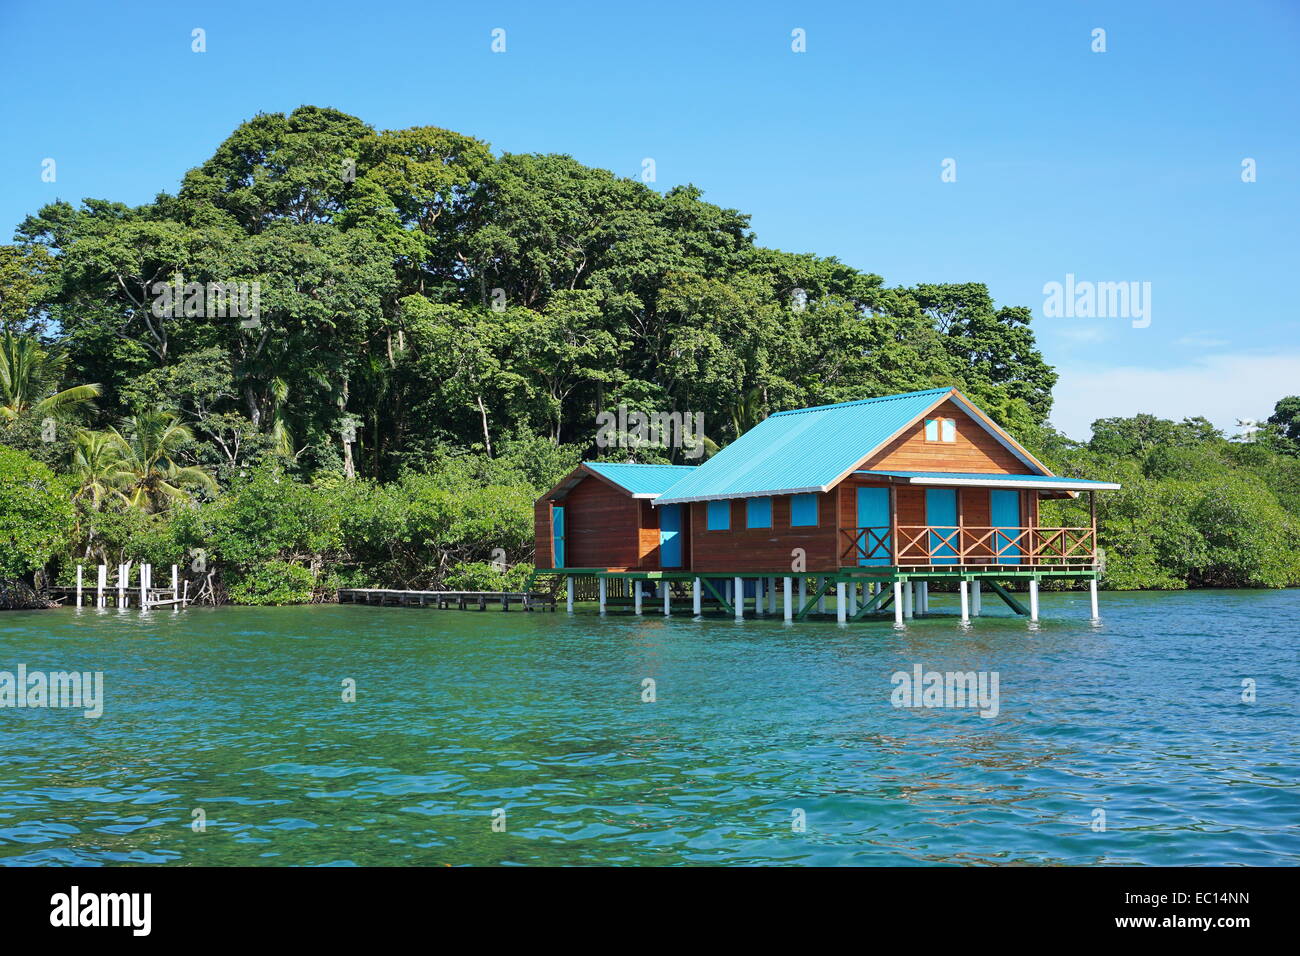 Overwater bungalow with lush tropical vegetation in background, Caribbean, Bocas del Toro, Panama Stock Photo